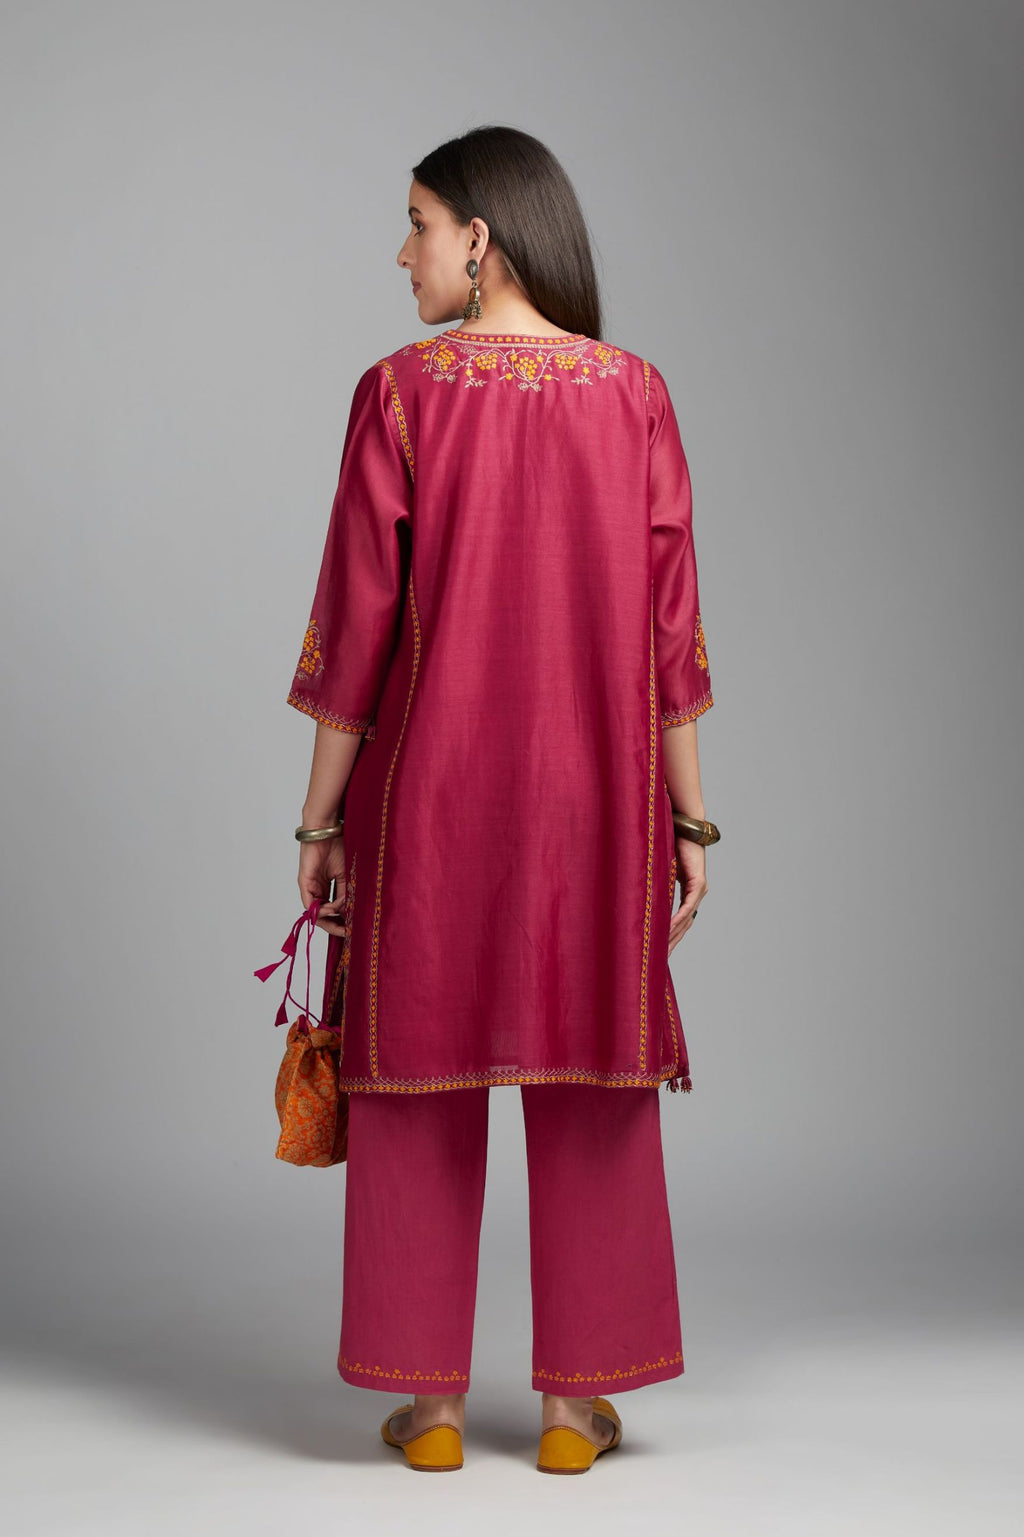 Deep wine short kalidar kurta set, highlighted with delicate contrast coloured embroidery